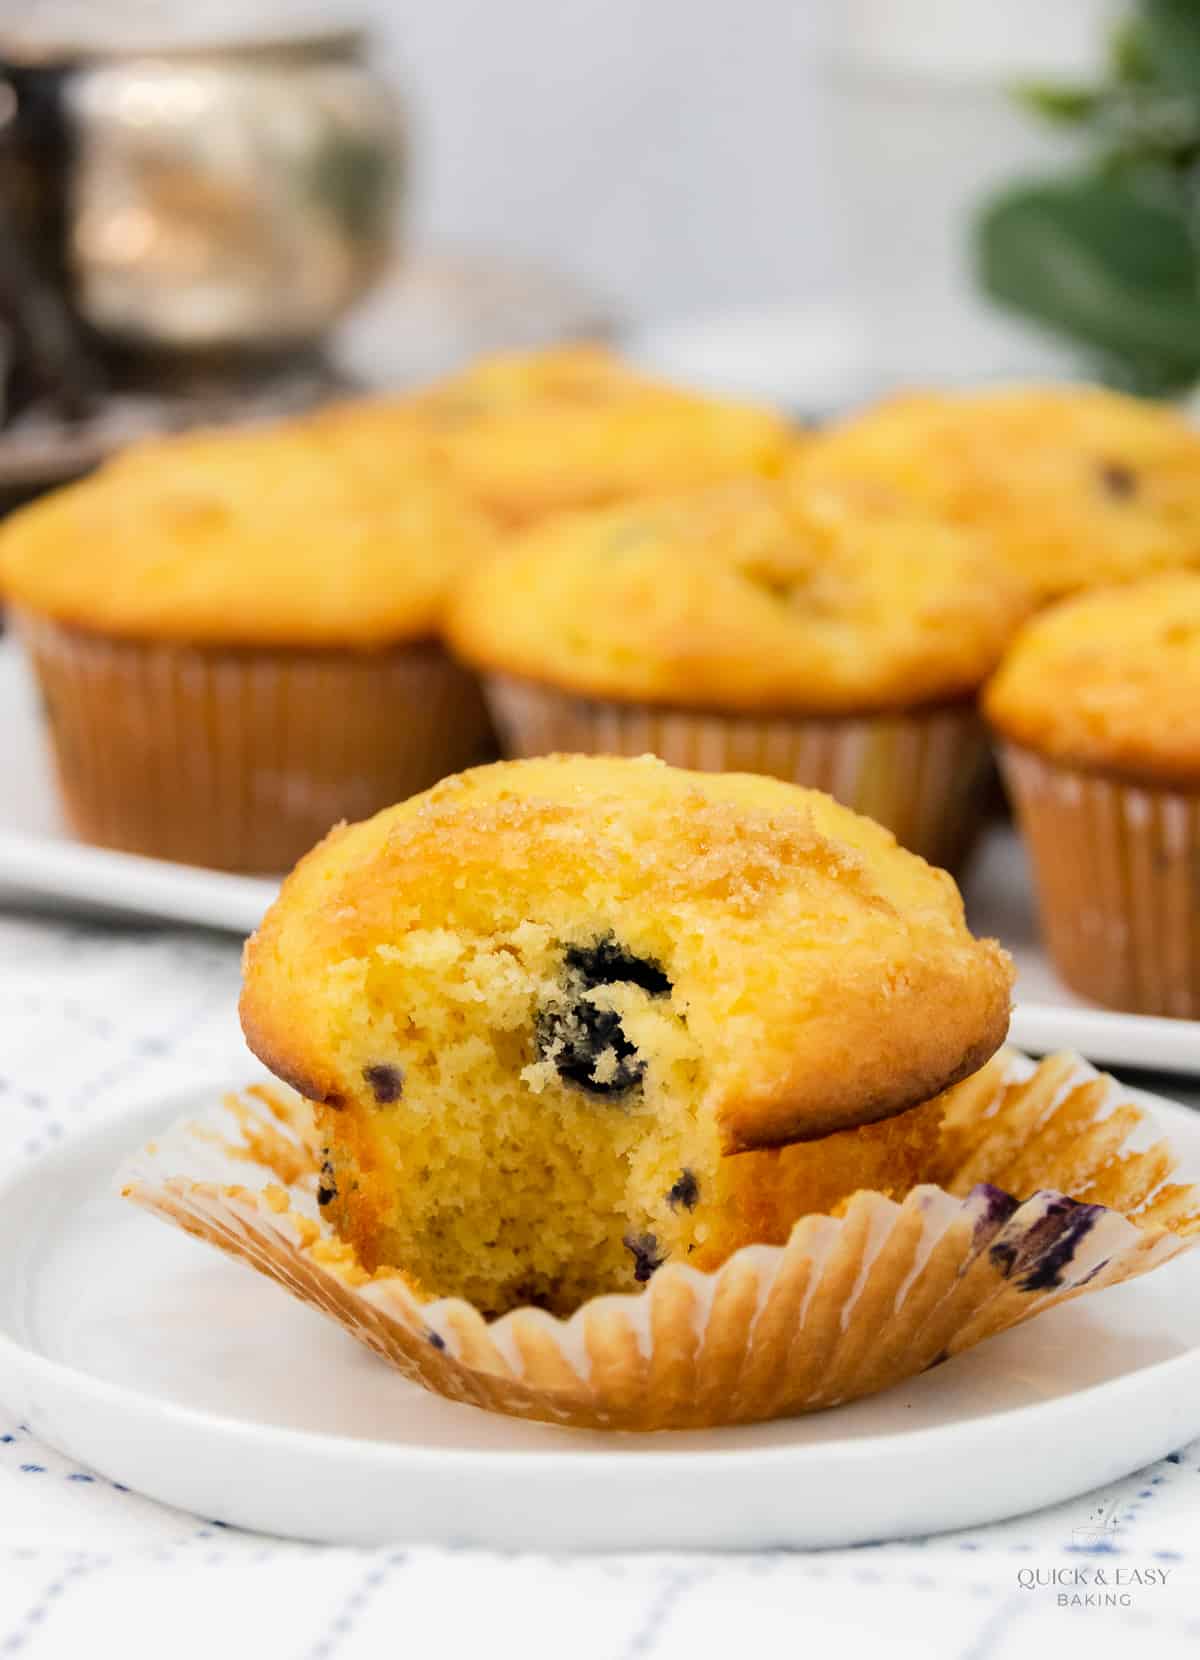 Close up image of a blueberry muffin with the wrapper unwrapped and a bite out of it.